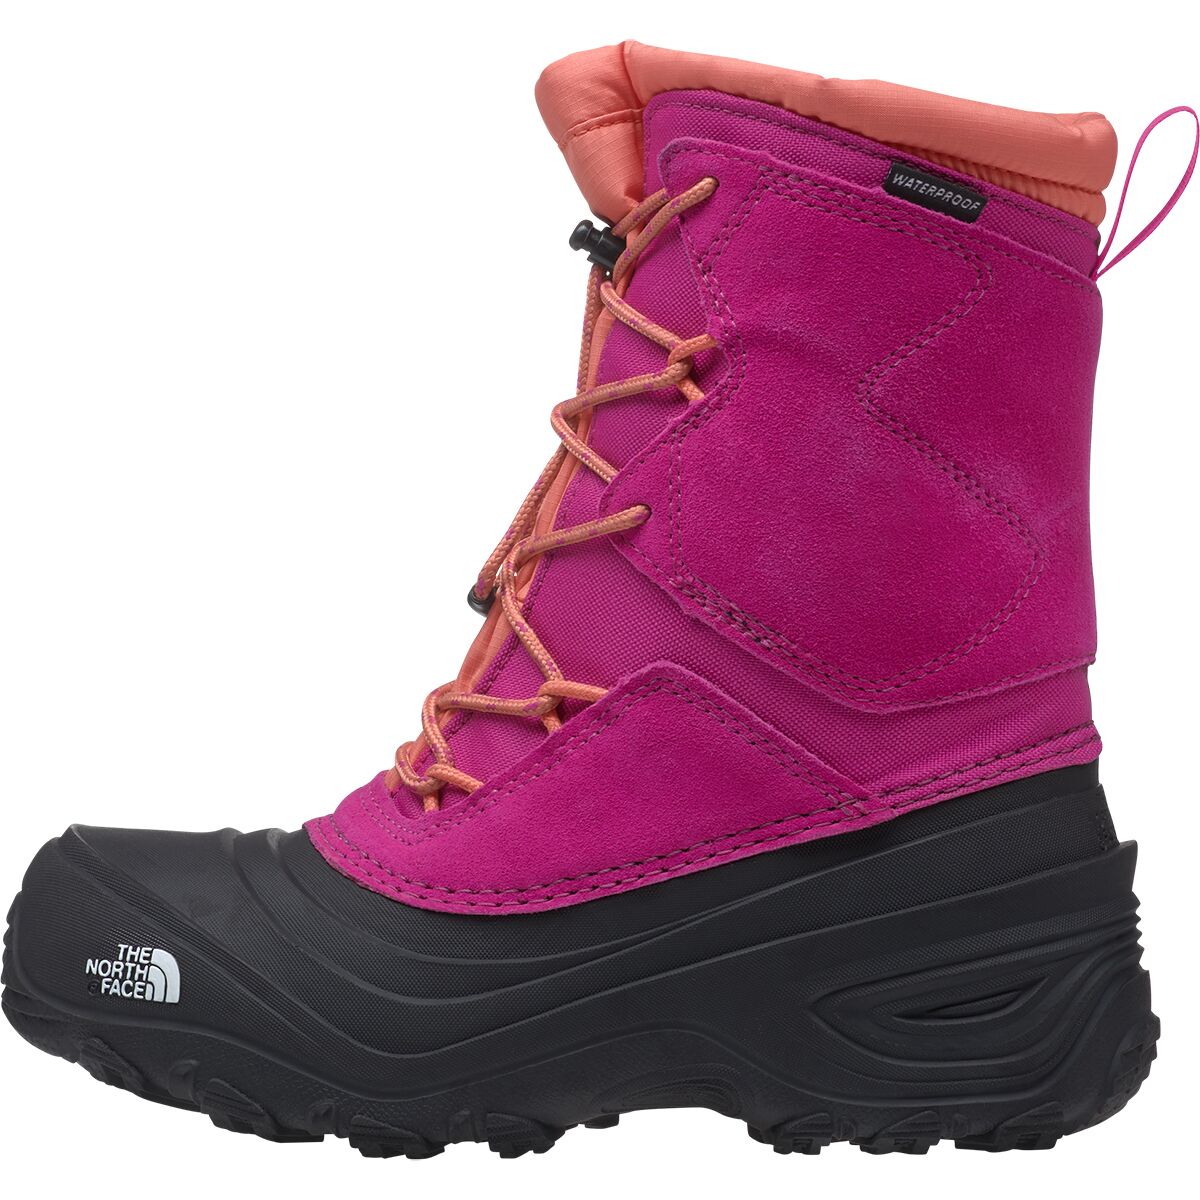 The North Face Alpenglow V Waterproof Boot - Kids'